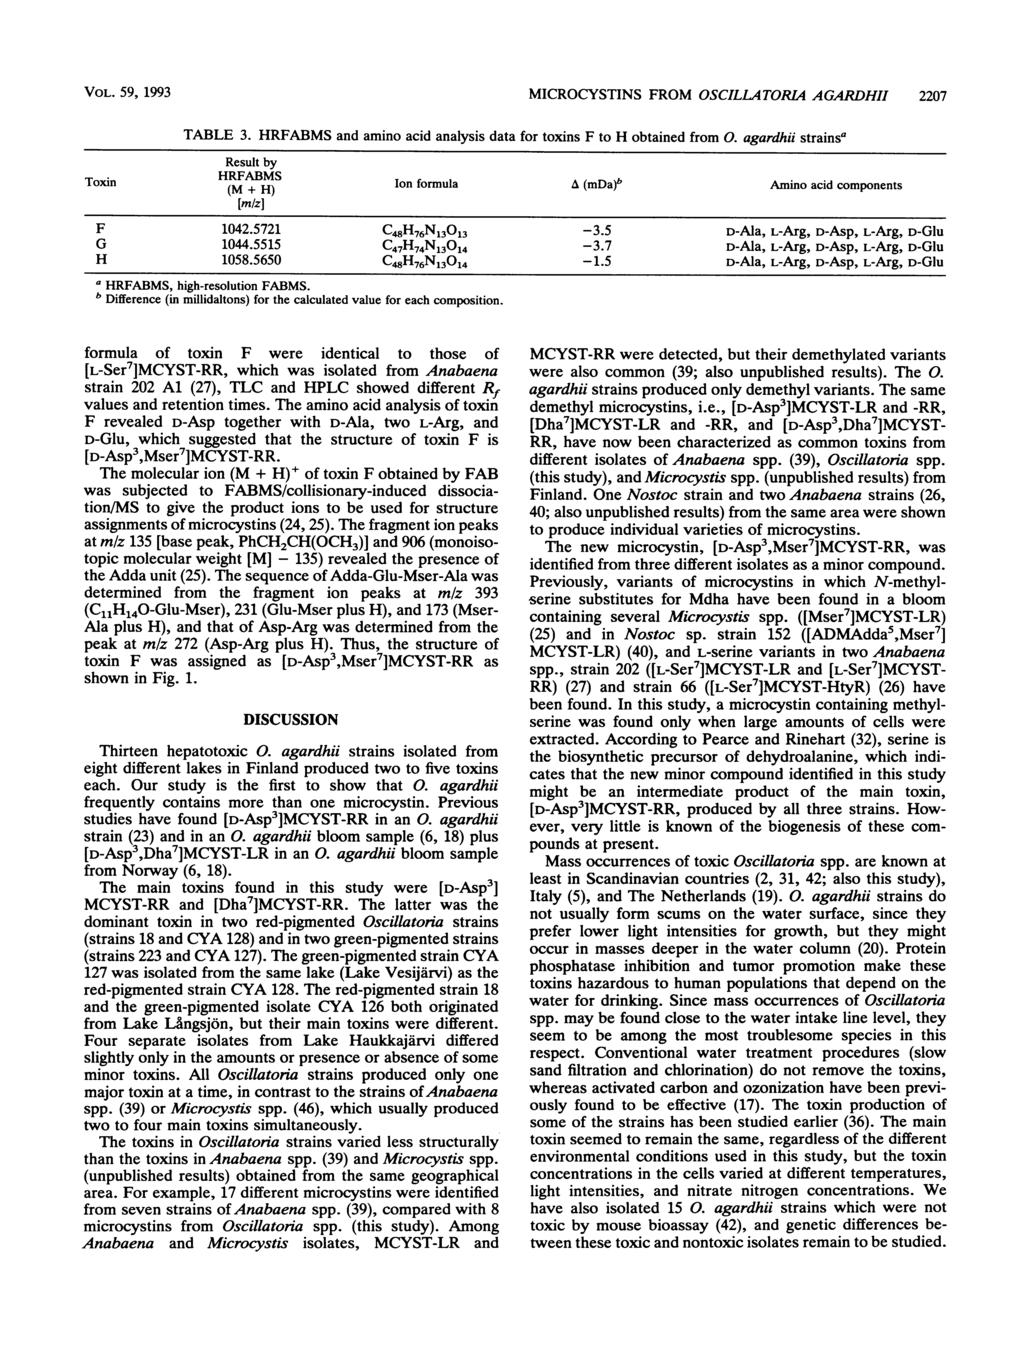 VOL. 59, 1993 MICROCYSTINS FROM OSCILLATORL4 AGARDHII 2207 TABLE 3. HRFABMS and amino acid analysis data for toxins F to H obtained from 0.